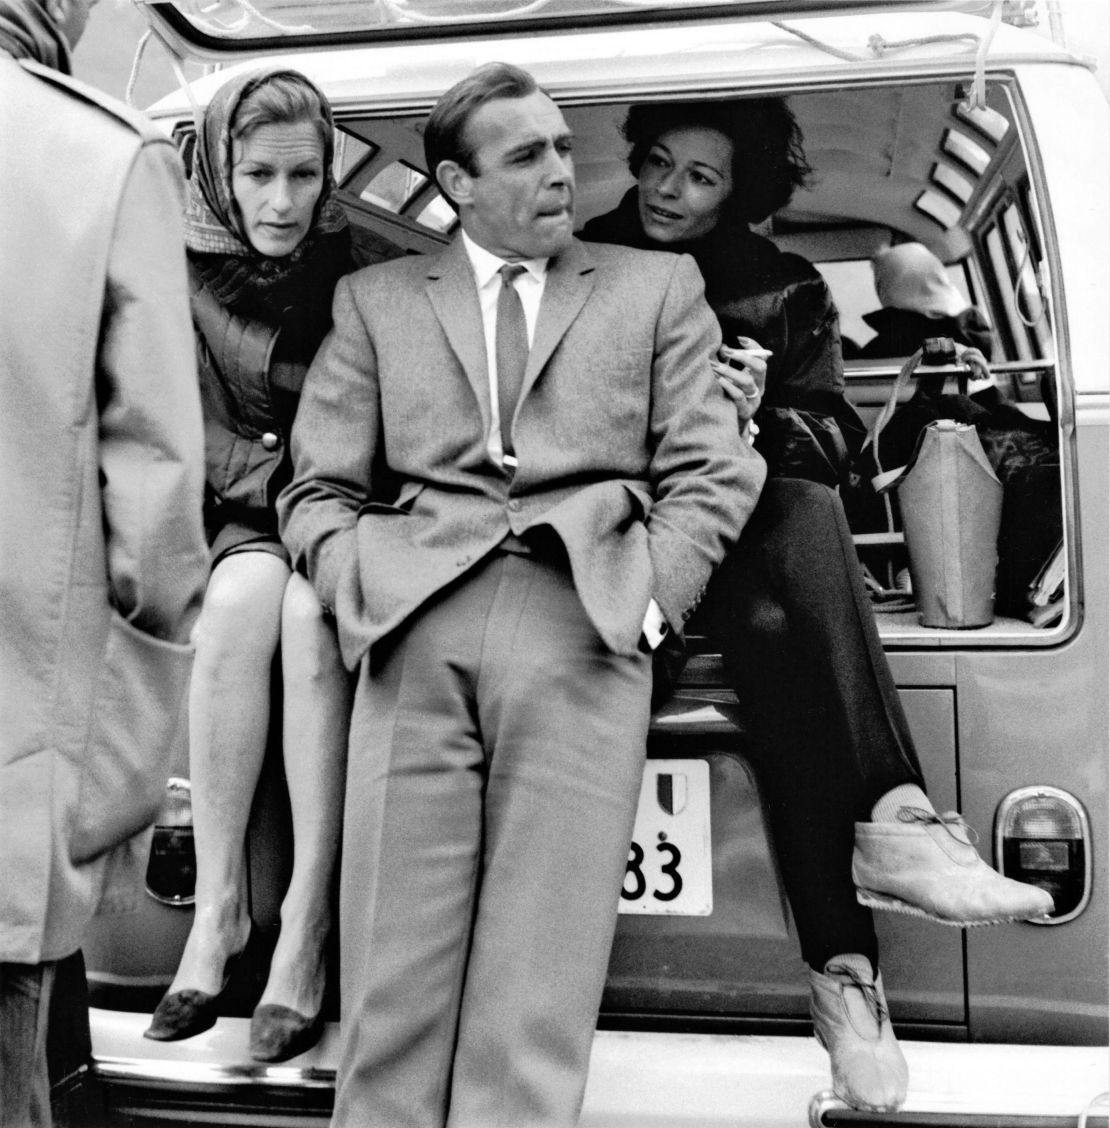 Sean Connery pictured alongside Tania Mallet's stunt double, Phillys Cornell (left), and director Guy Hamilton's wife, Miriam Charrière (right).